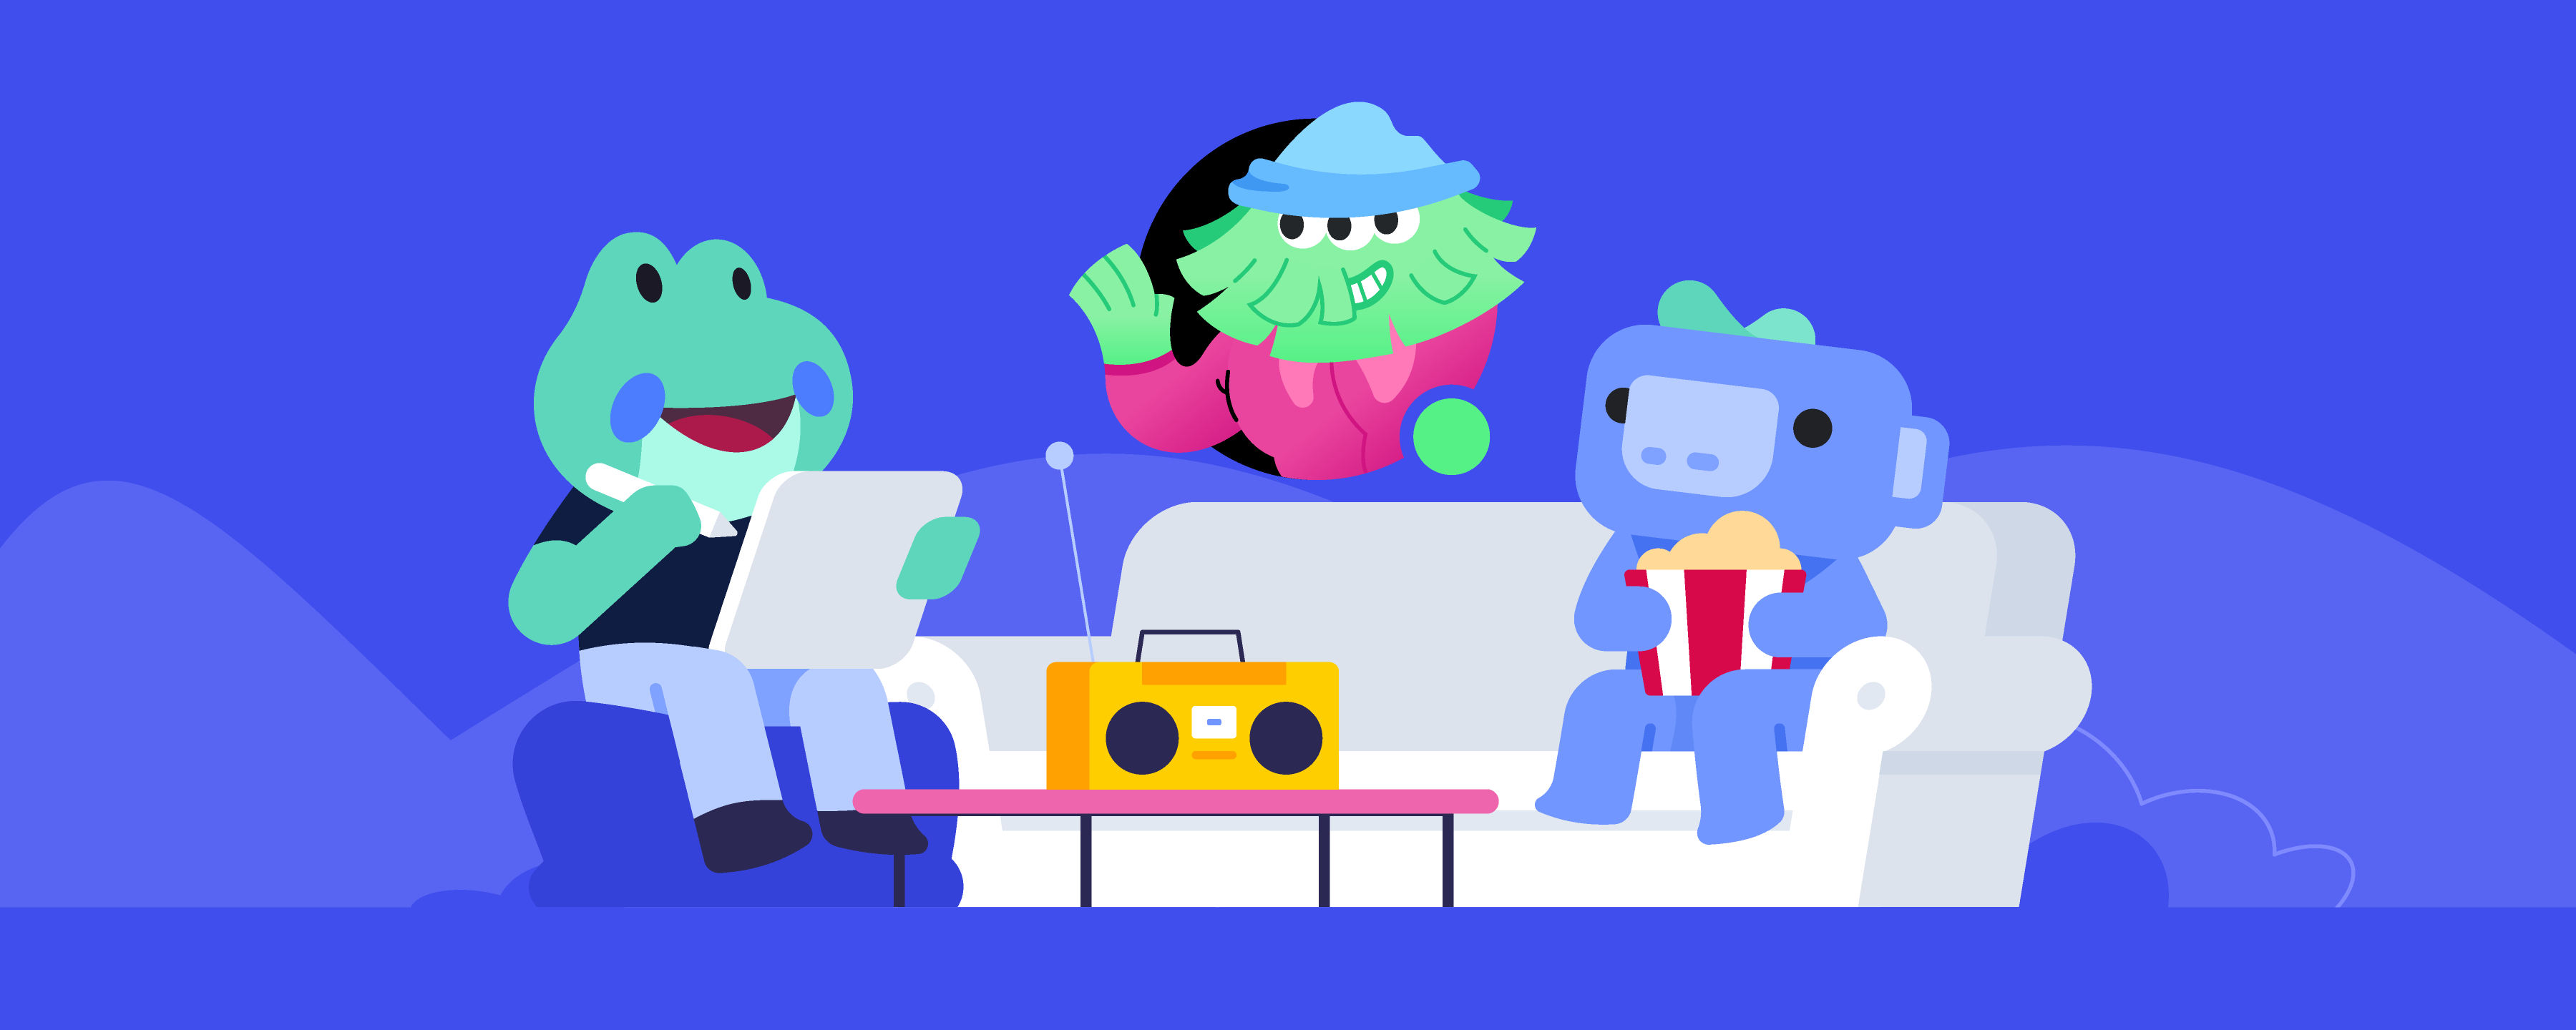 Three friends gathered around a couch, spending time together. One is floating inside a Discord profile icon, representing someone who’s connected digitally. 